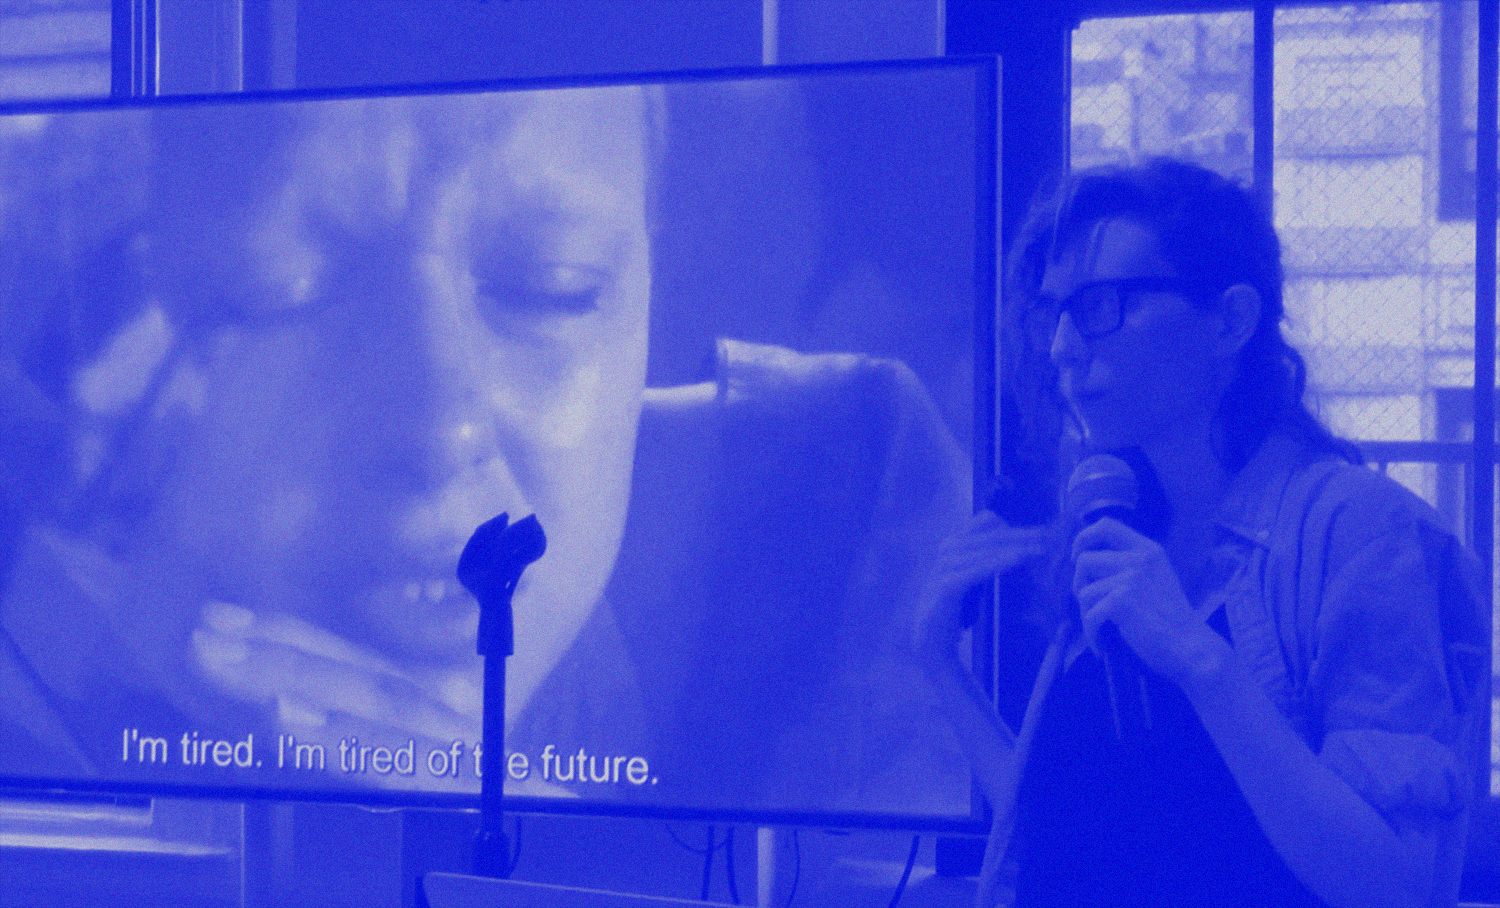 photo of person speaking into microphone in front of movie screen-shot on monitor with a subtitle that reads, 